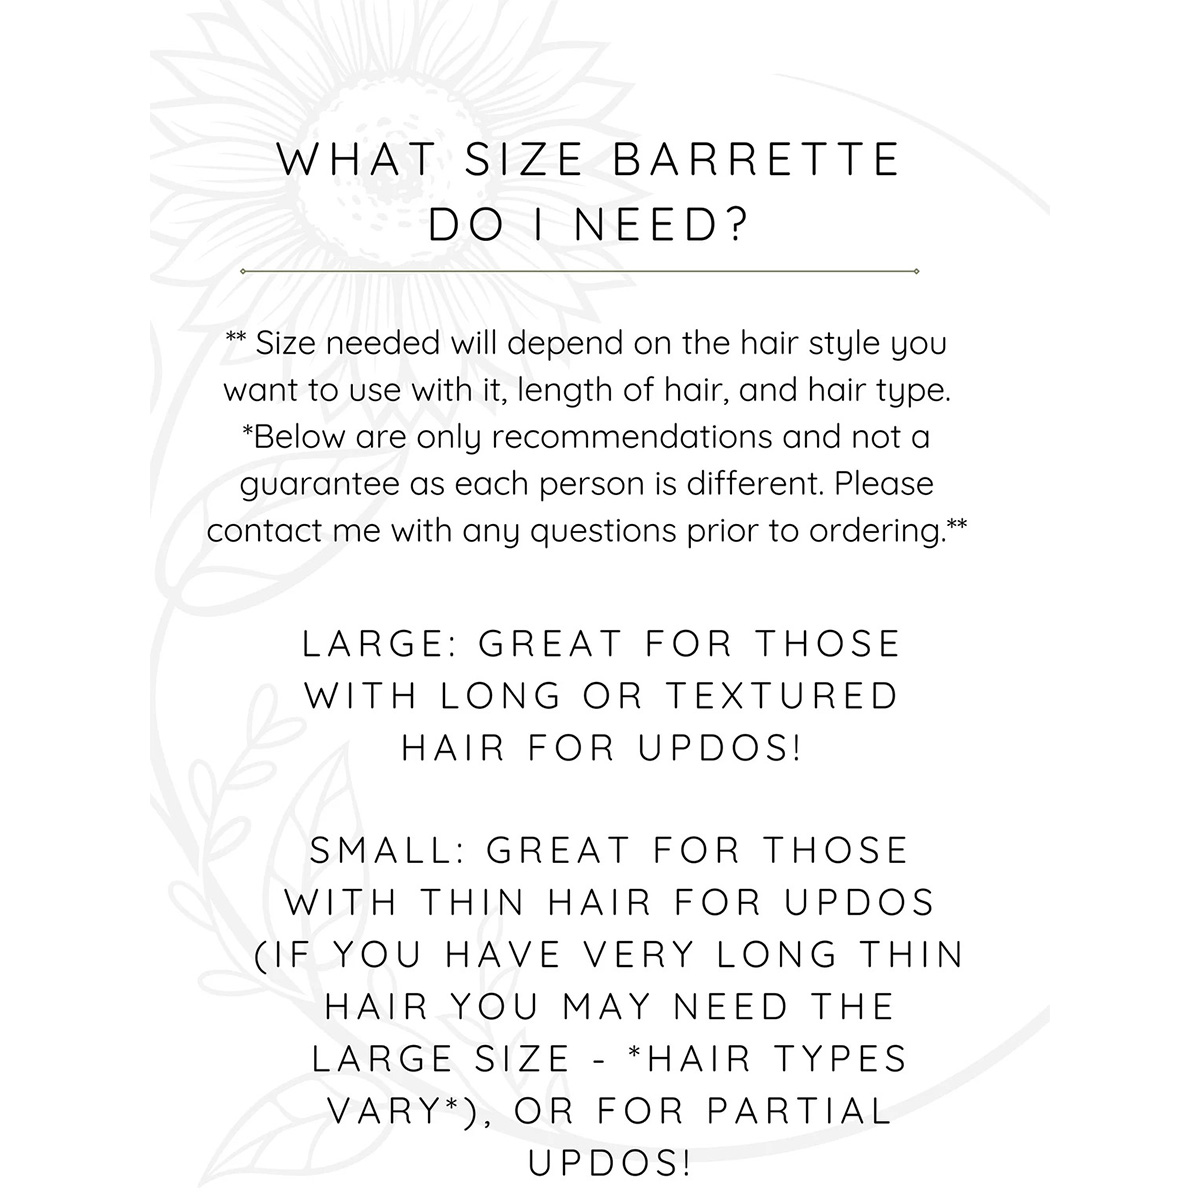 Hair Barrette Size Recommendations